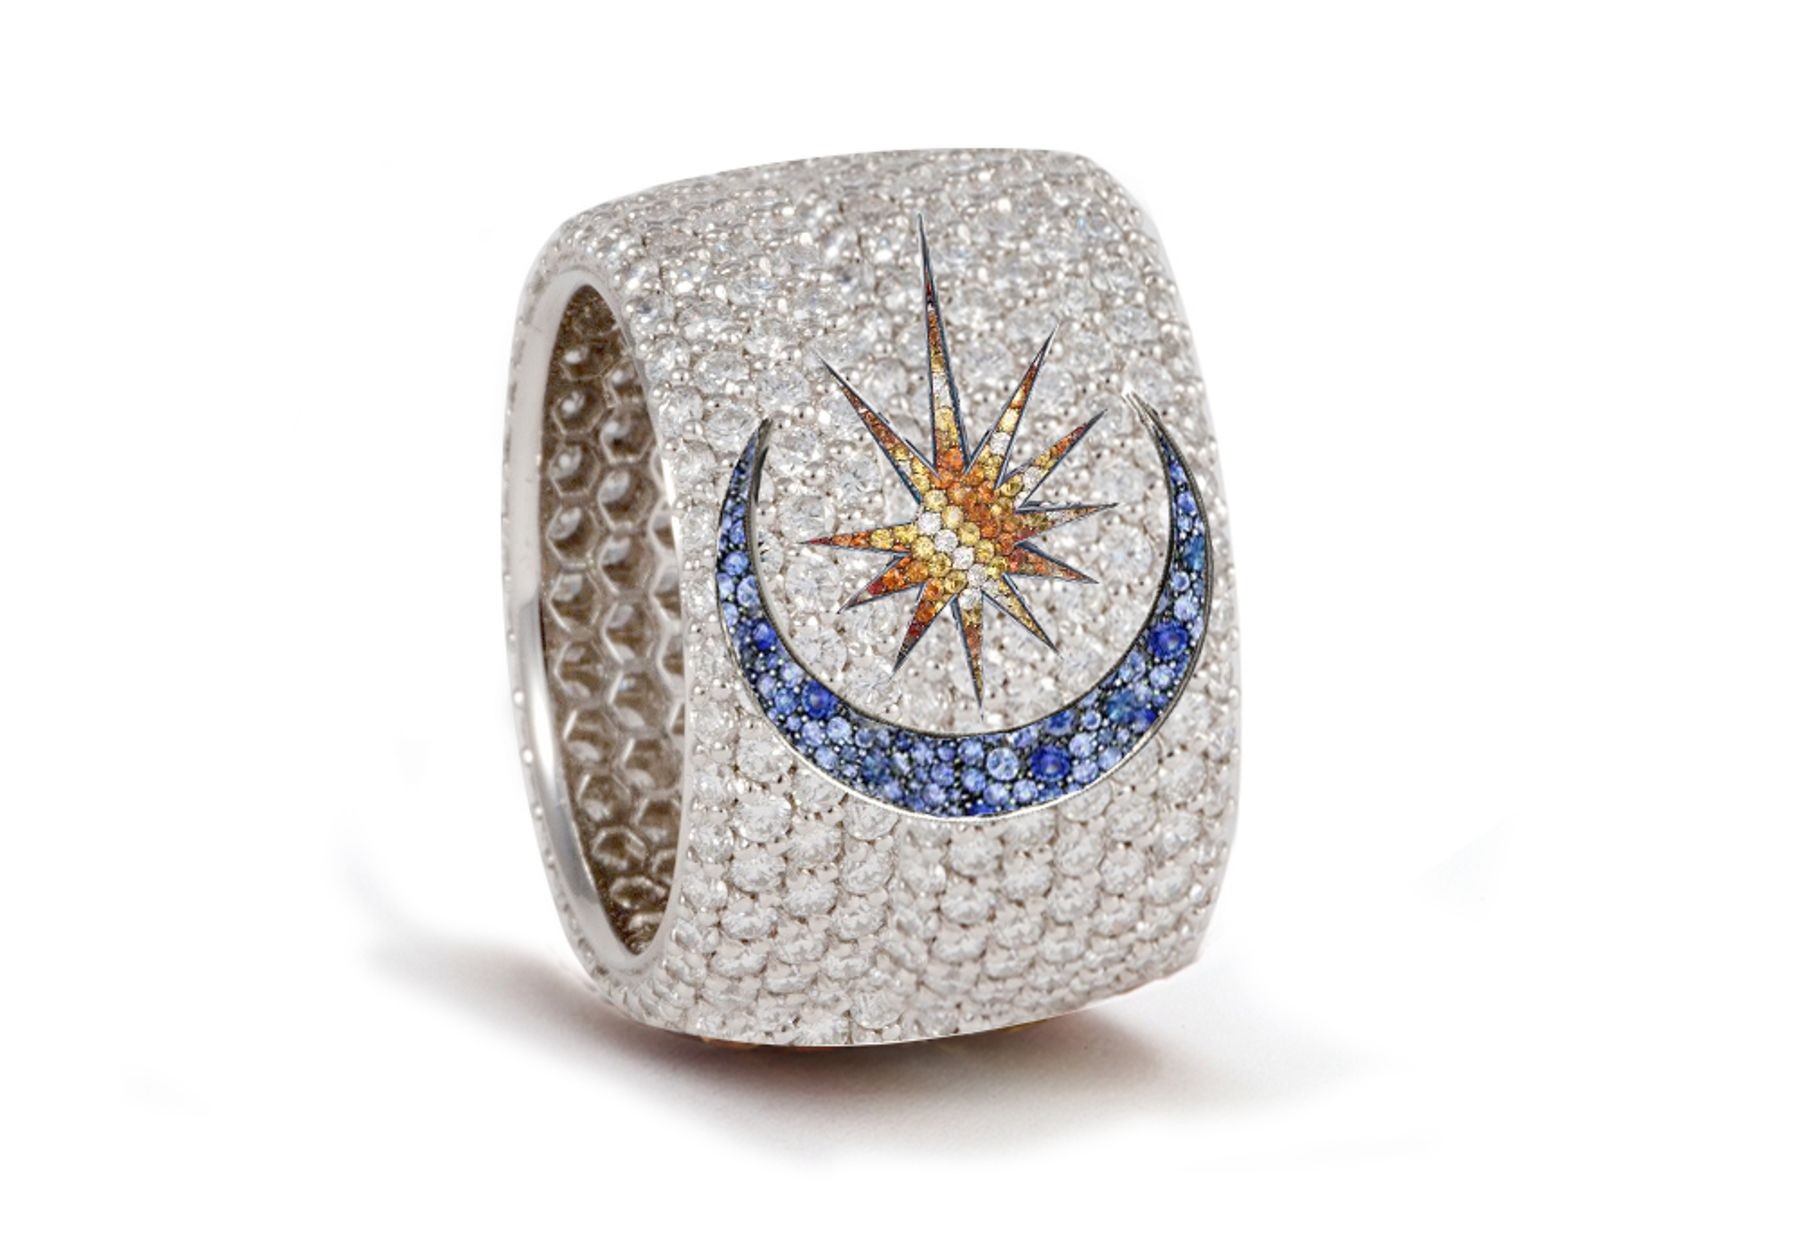 Delicate French pavee Sparkling Brilliant-Cut Round Diamonds & Vivid Multi-Colored Precious Stones Eternity Rings & Bands Featuring Celestial Moon & Stars